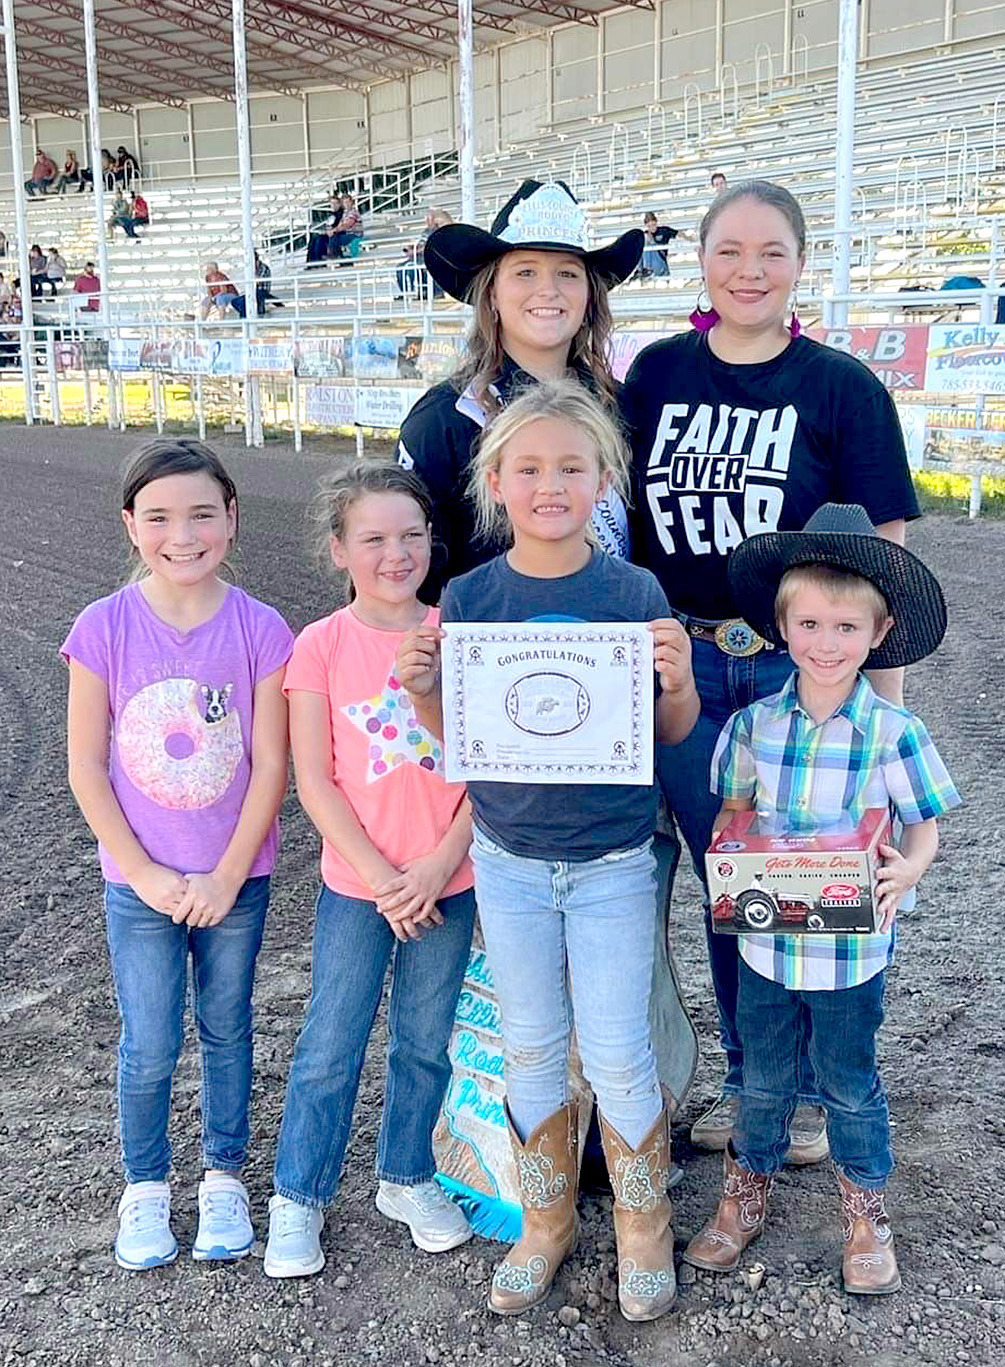 TAKING HOME THE BUCKLE in the mutton busting competition at the Richard Schleicher Memorial Bull Riding event held on Saturday, September 24th was Alynn Bouchey. Pictured are (front row, from left): Maddy Swaney, Jessa Swaney, Alynn Bouchey, Matthew Reiner; (back row) Ellis County Rodeo Princess Skylar Amlong and Cheyene Carlson.